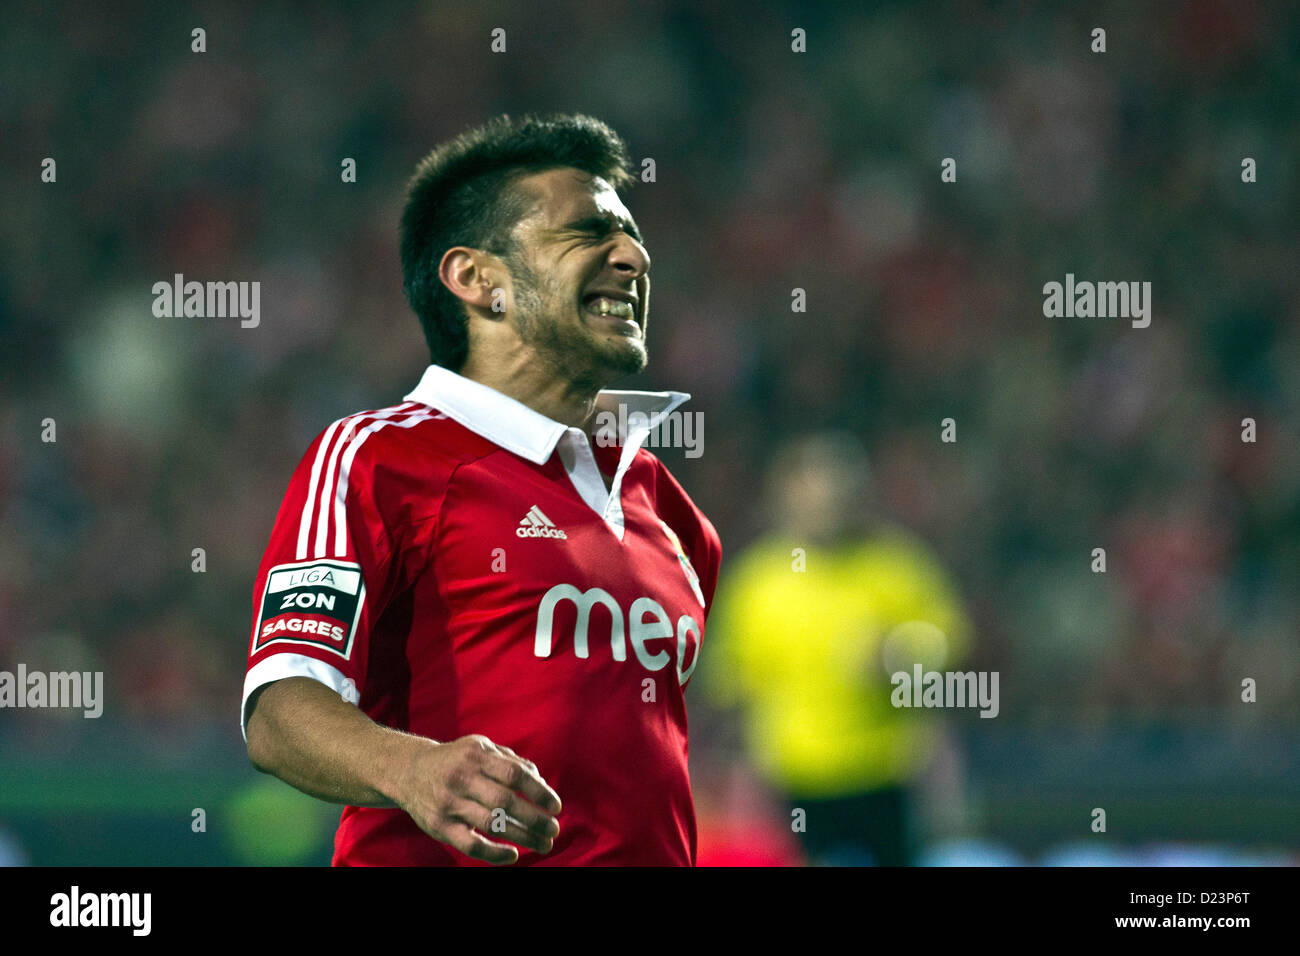 13.01.2013. Lisbon, Portugal.  Eduardo Salvio SL Benfica forward reacts after missing a goal during the football derby between Benfica and FC Porto in round 14 of the Portuguese Zon Sagres League, at Benfica's Luz Stadium in Lisbon Stock Photo